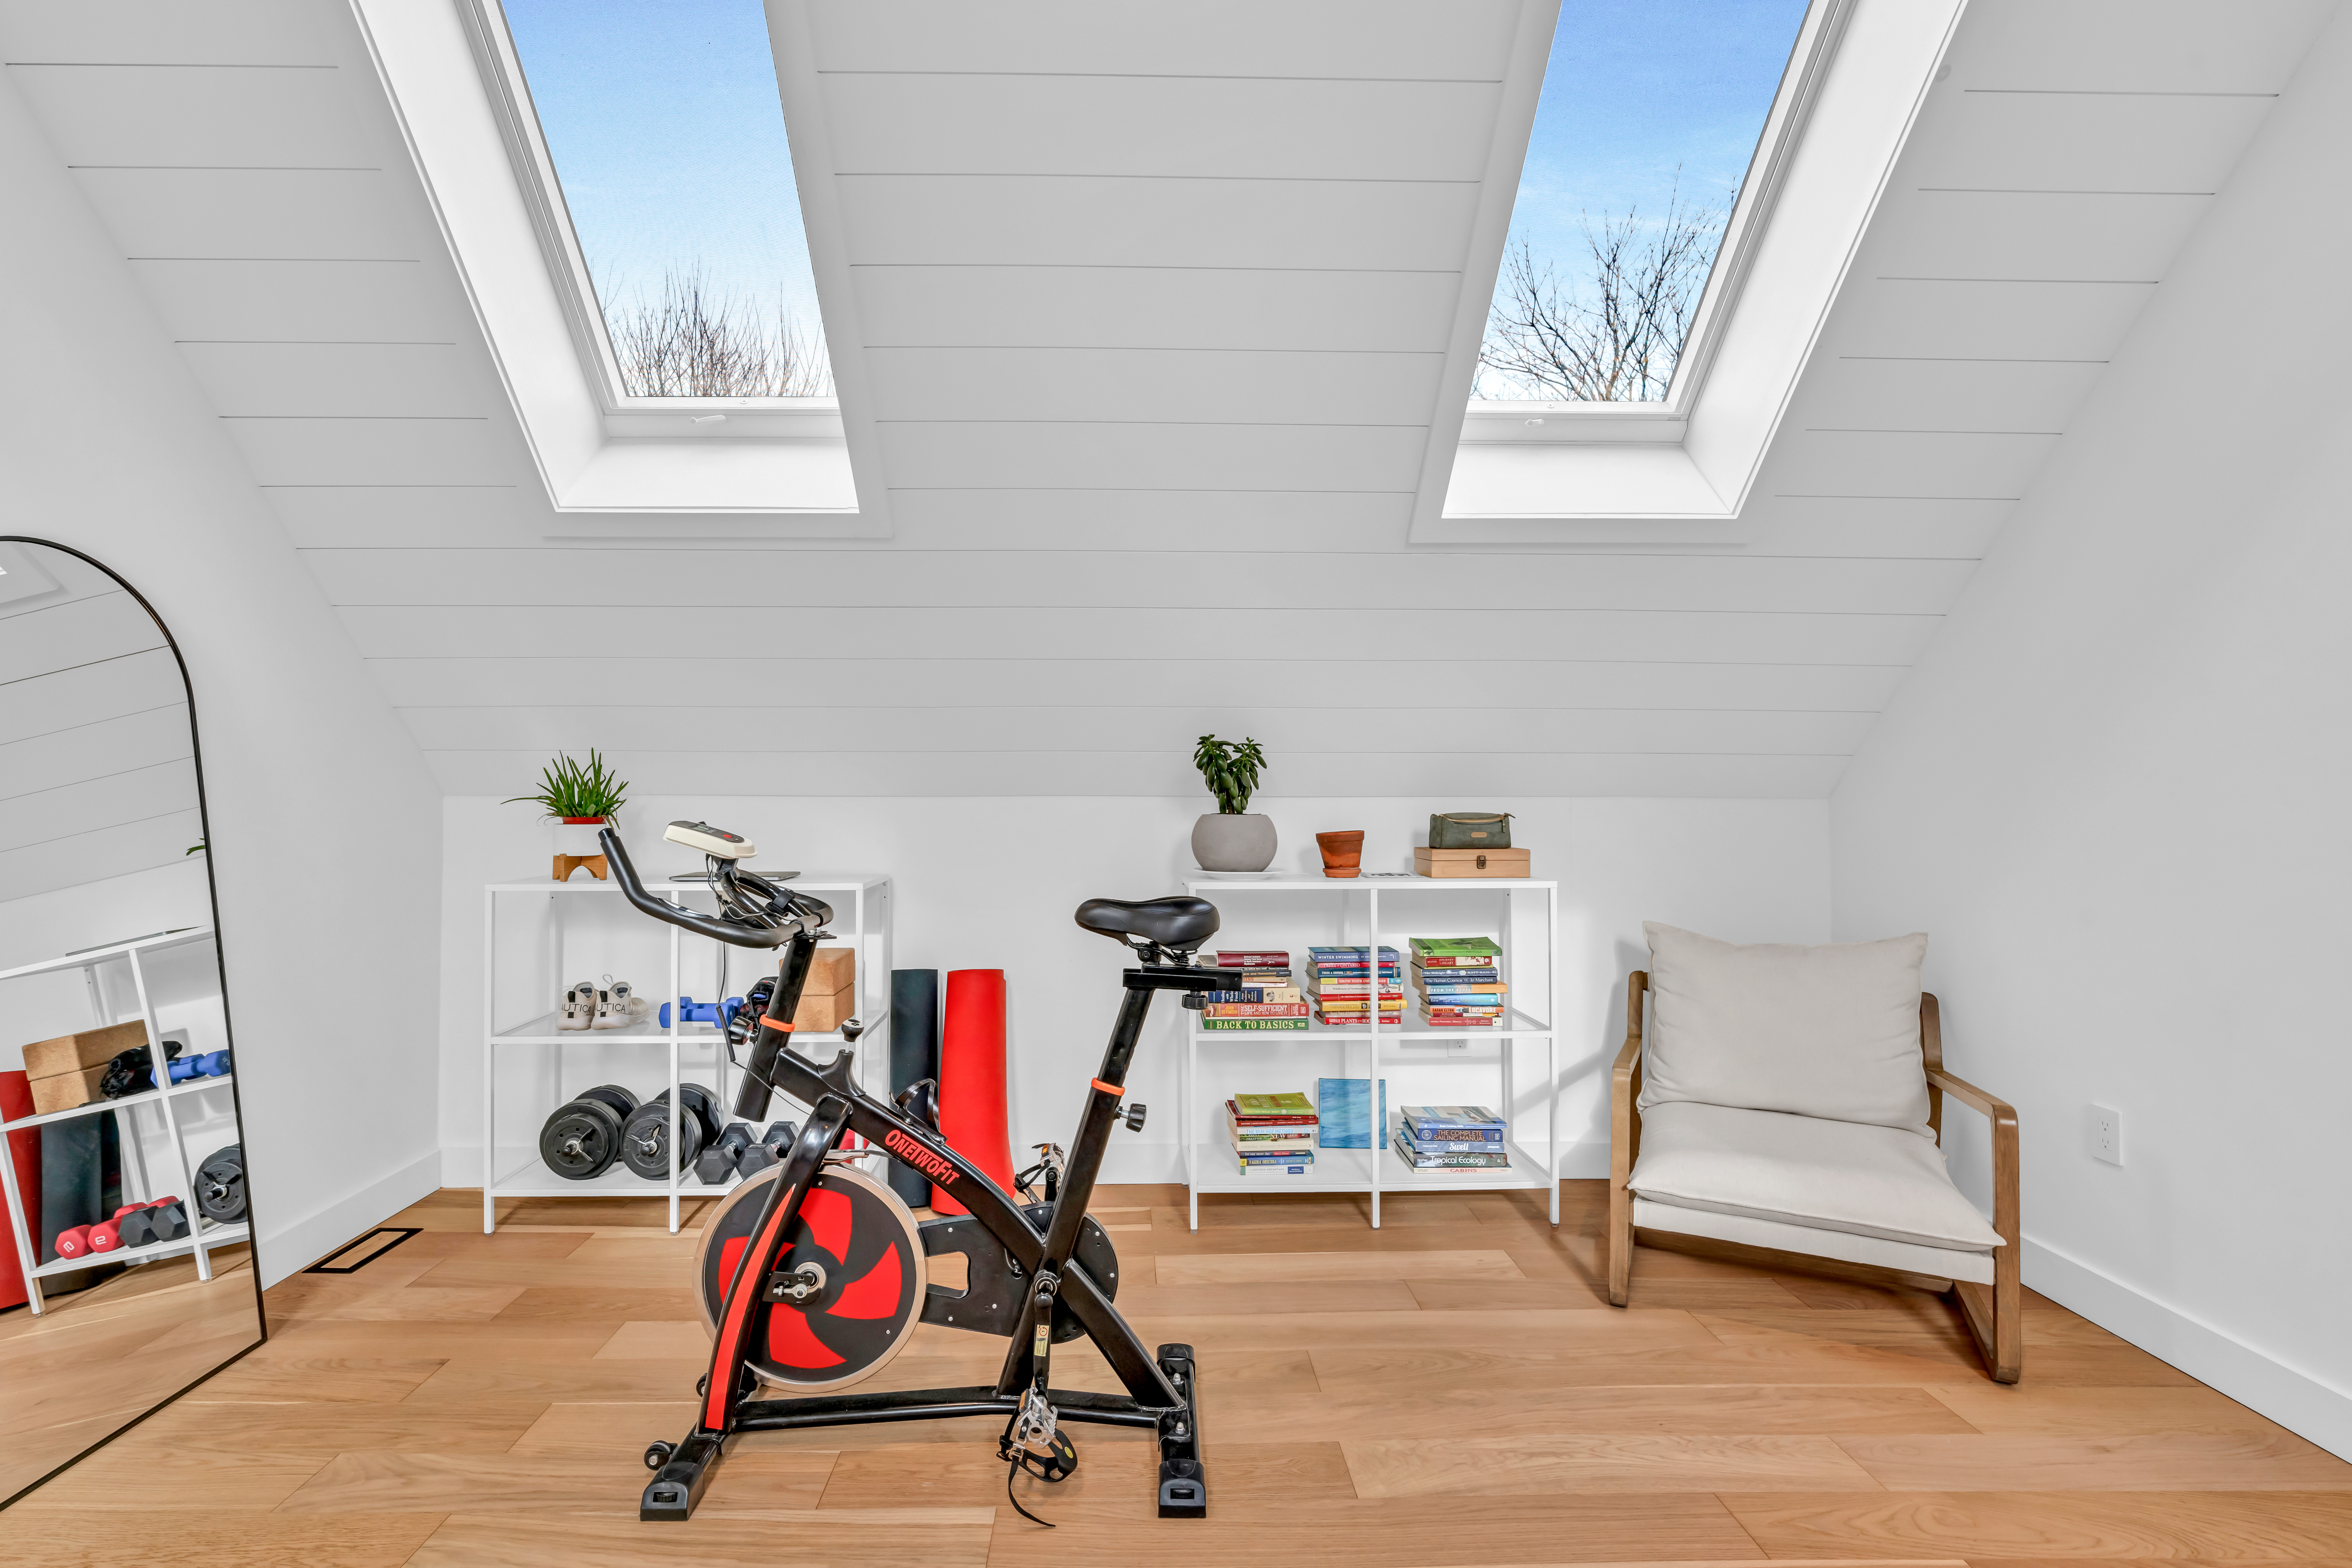 A bright space with a mirror, an exercise bike, short bookshelves and a chair. The slanted ceiling has two skylights, letting in lots of natural light.